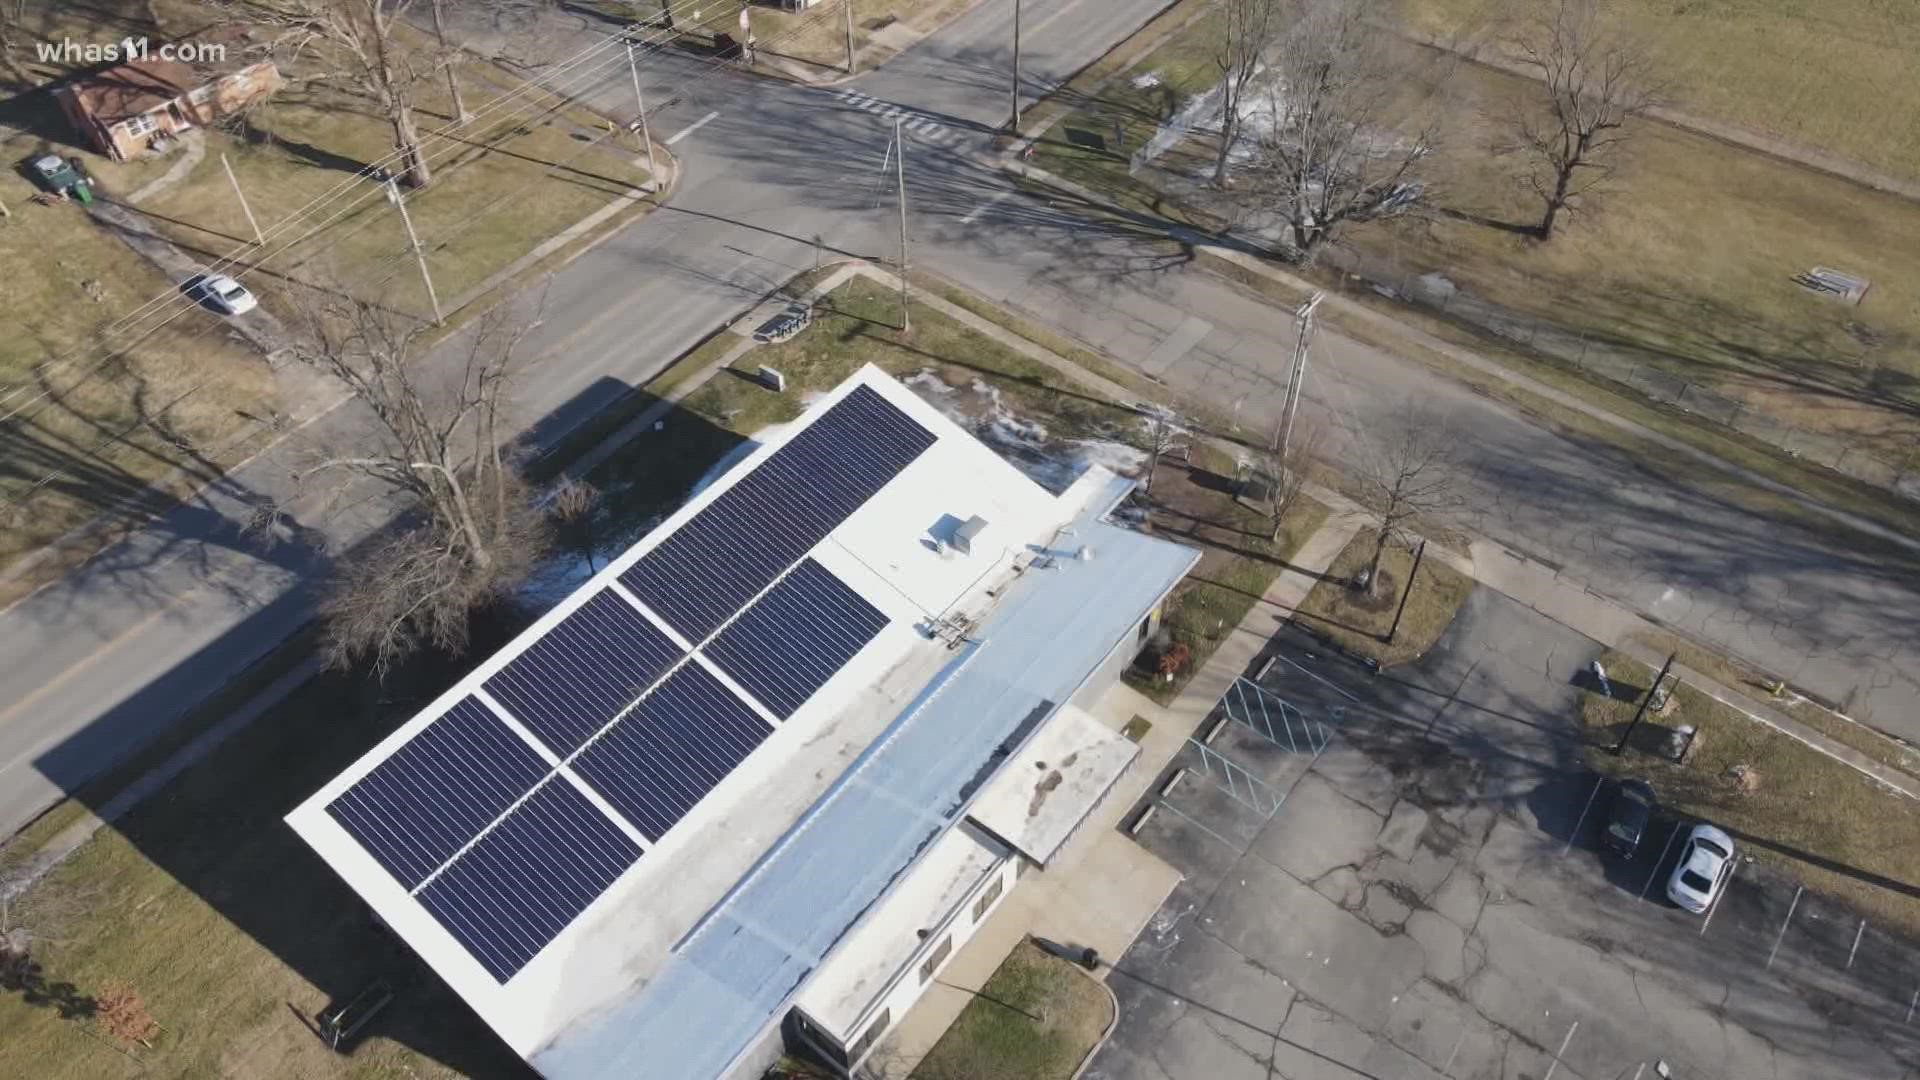 The mayor, along with the Louisville Sustainability Council officially launched the Solar Over Louisville Campaign on Friday.